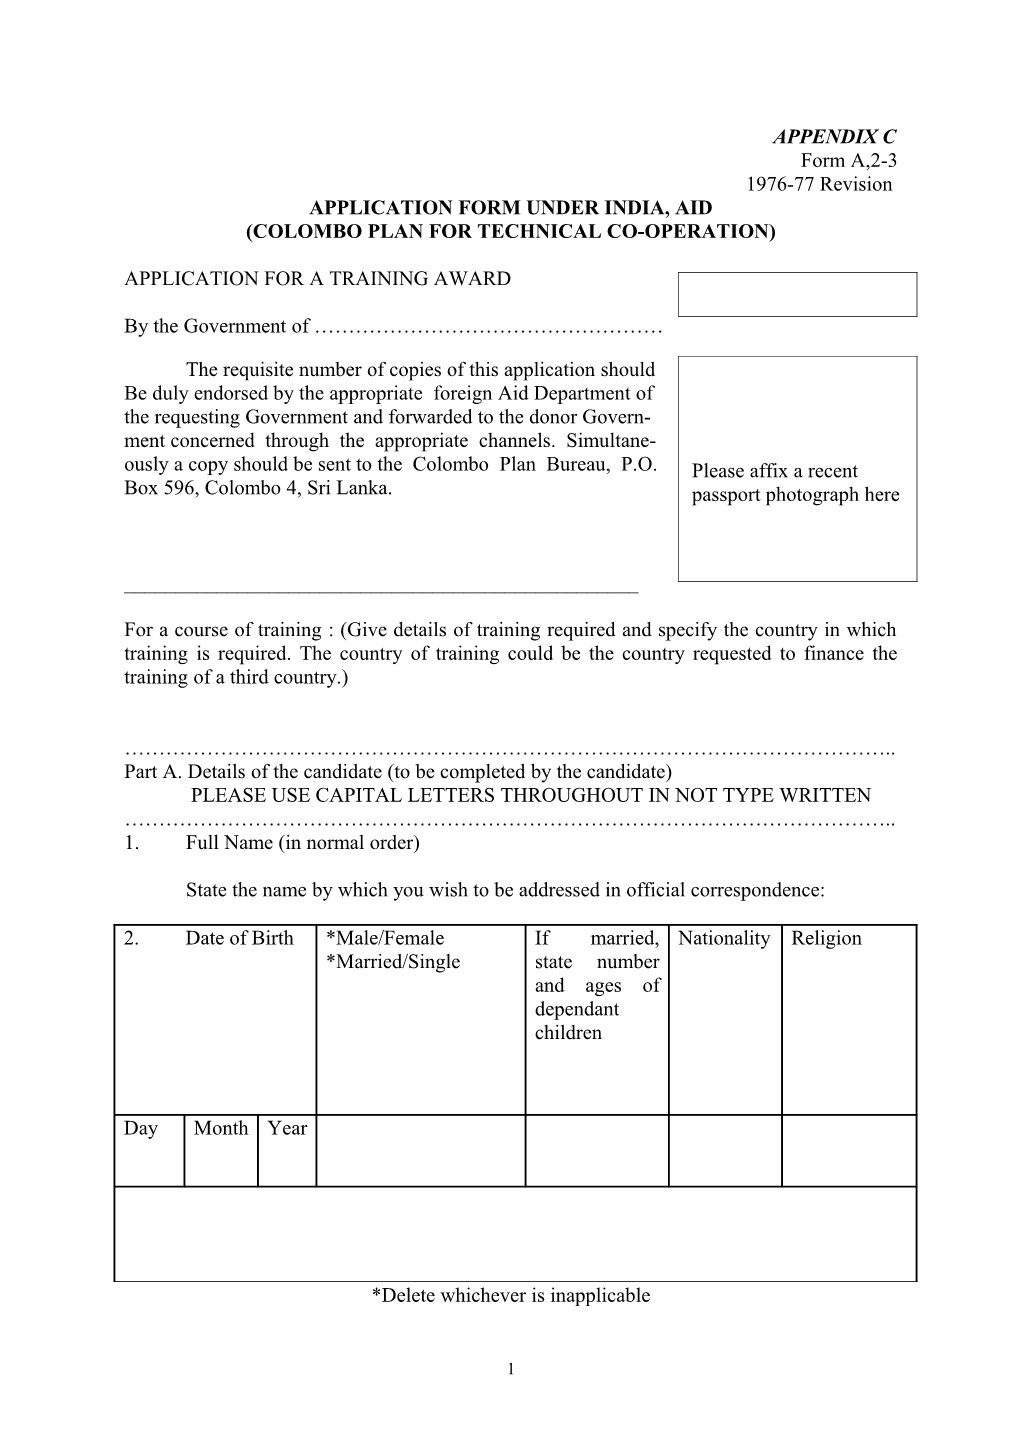 Application Form Under India, Aid